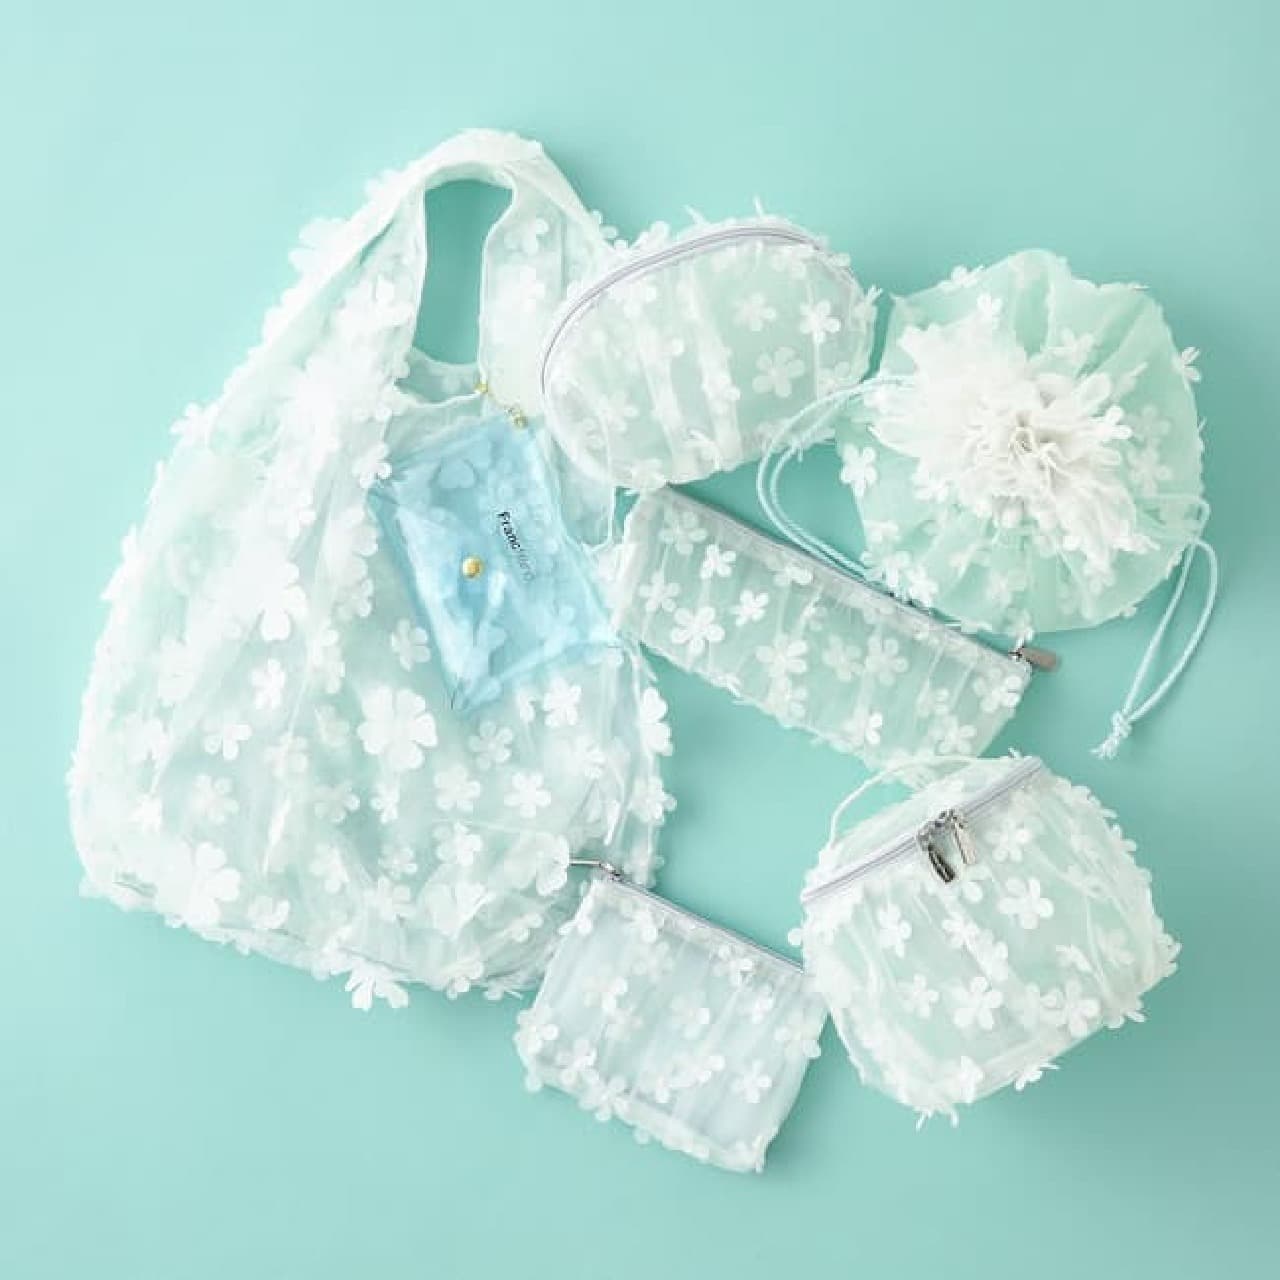 Francfranc's New Spring "Tulle" Series -- Drawstring Pouch, Vanity Pouch, etc. Feminine in Mint and Pink